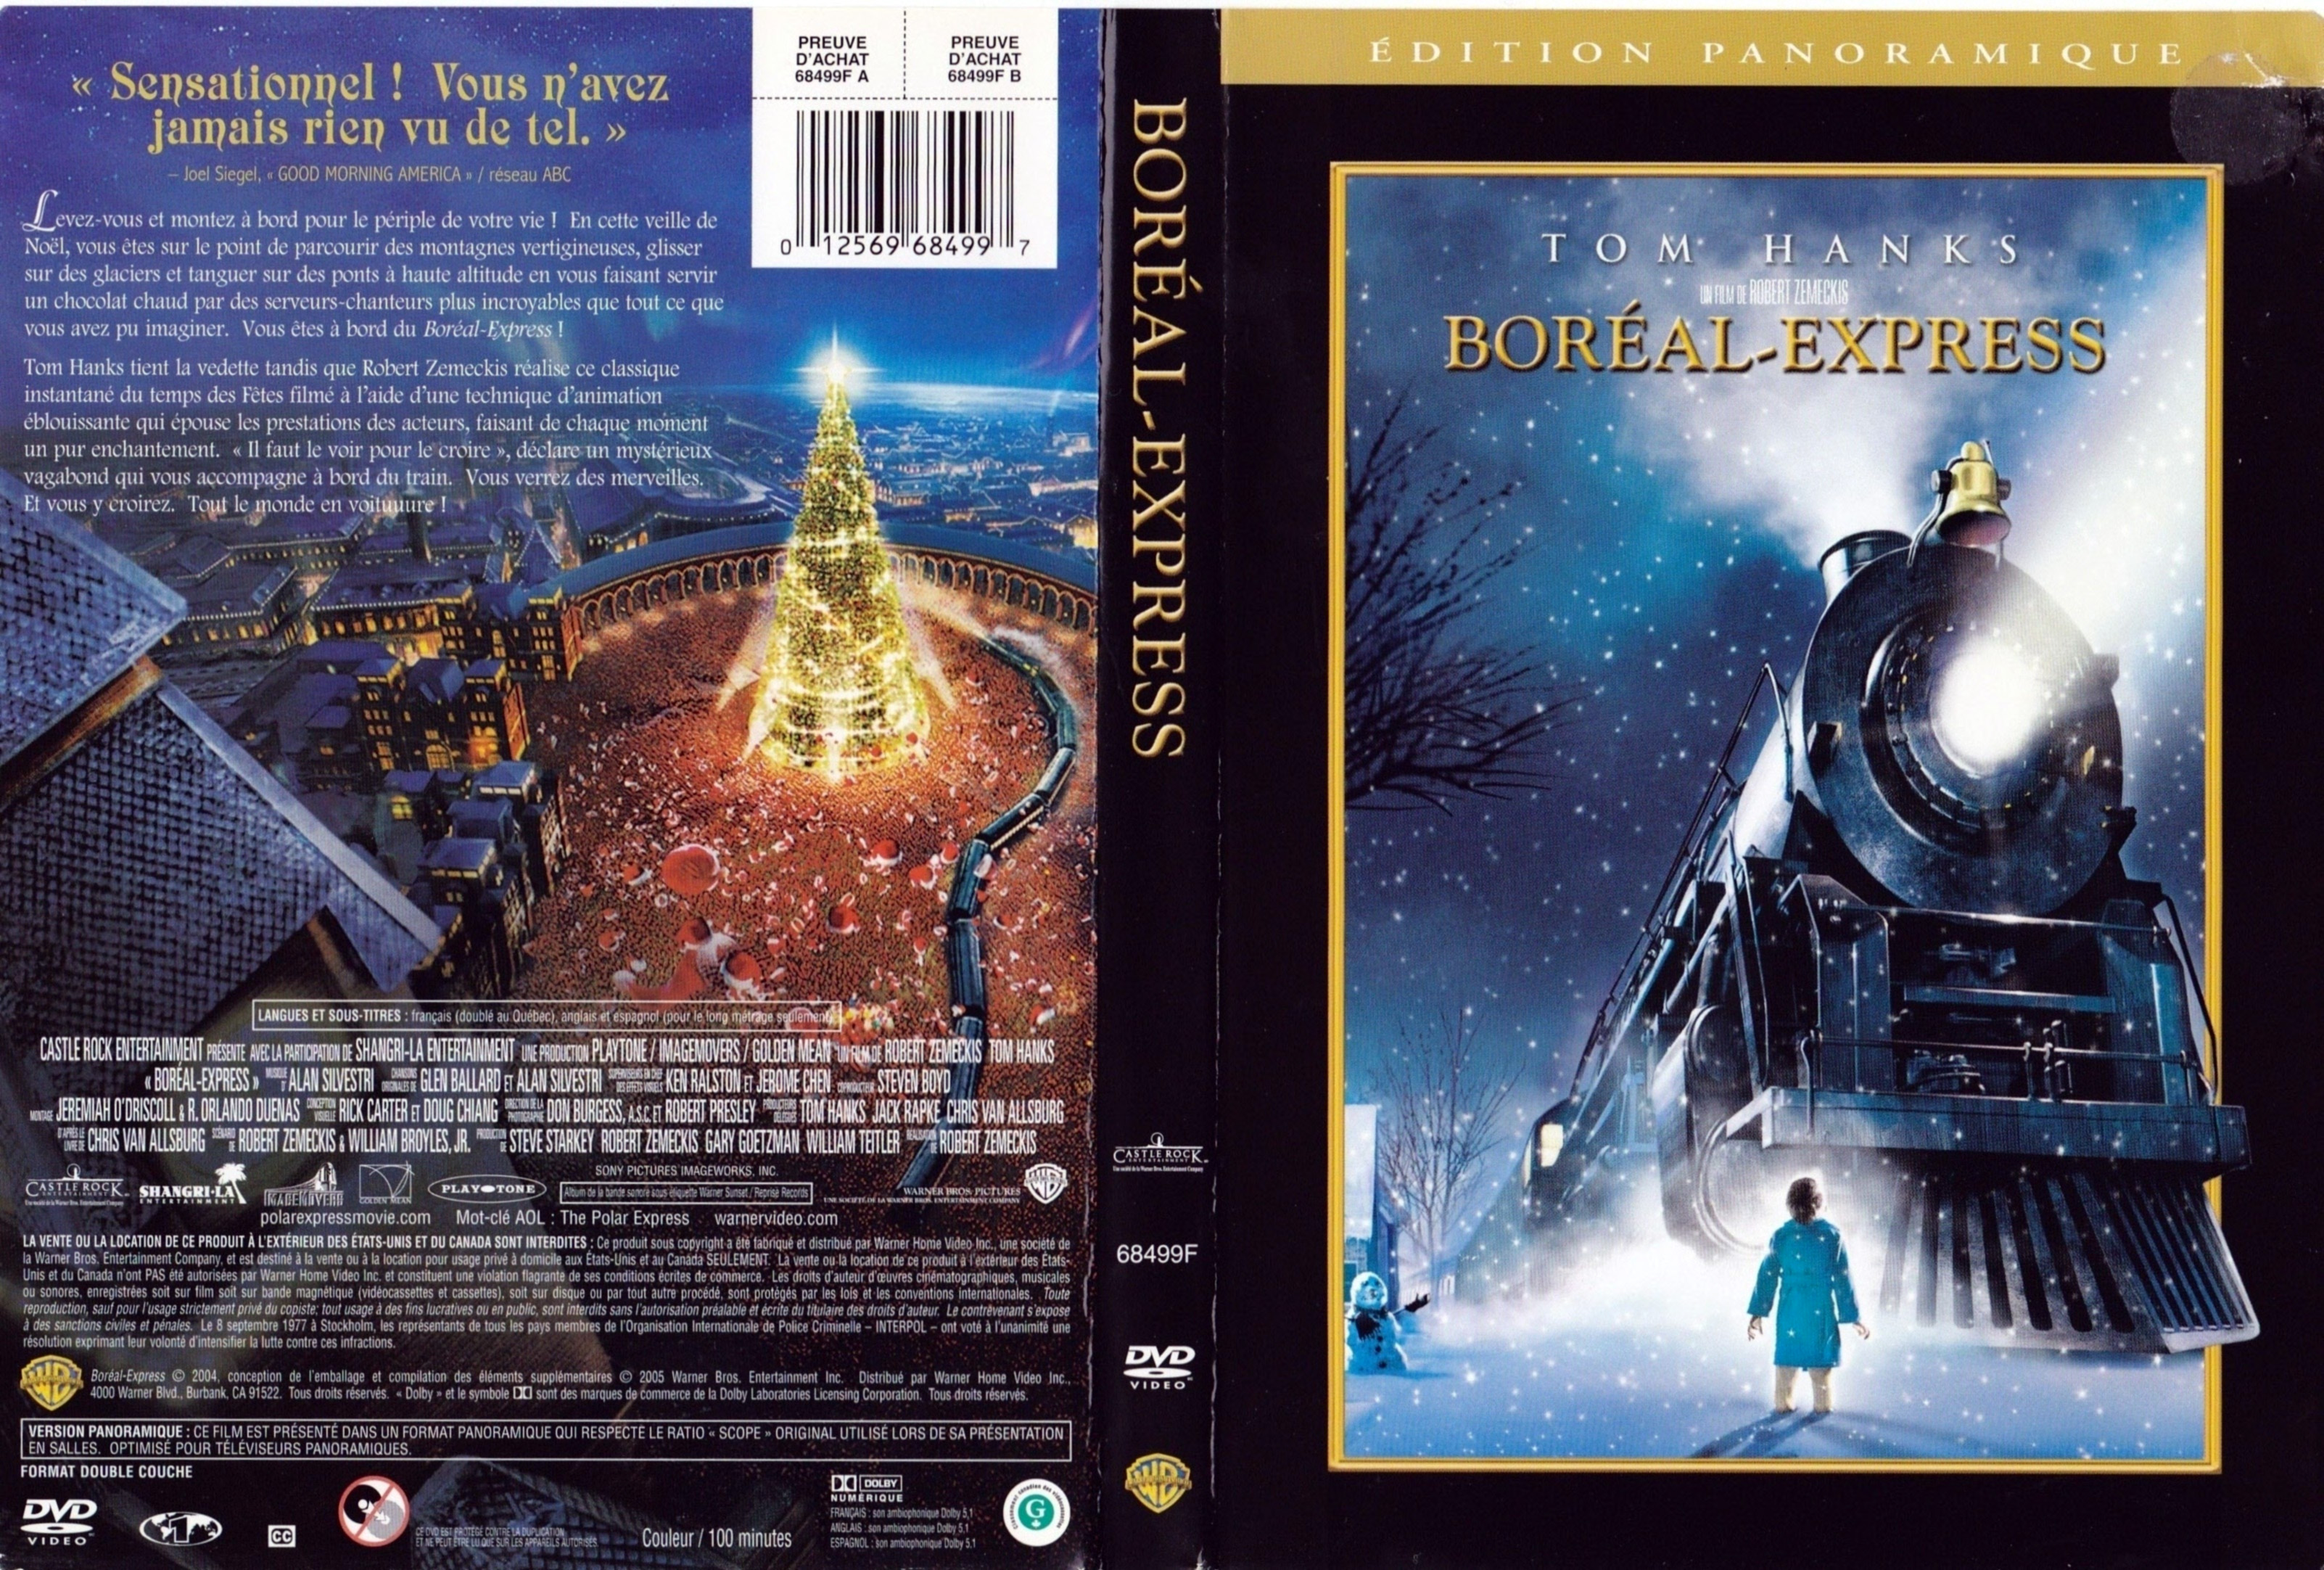 Jaquette DVD Boral Express (Canadienne)